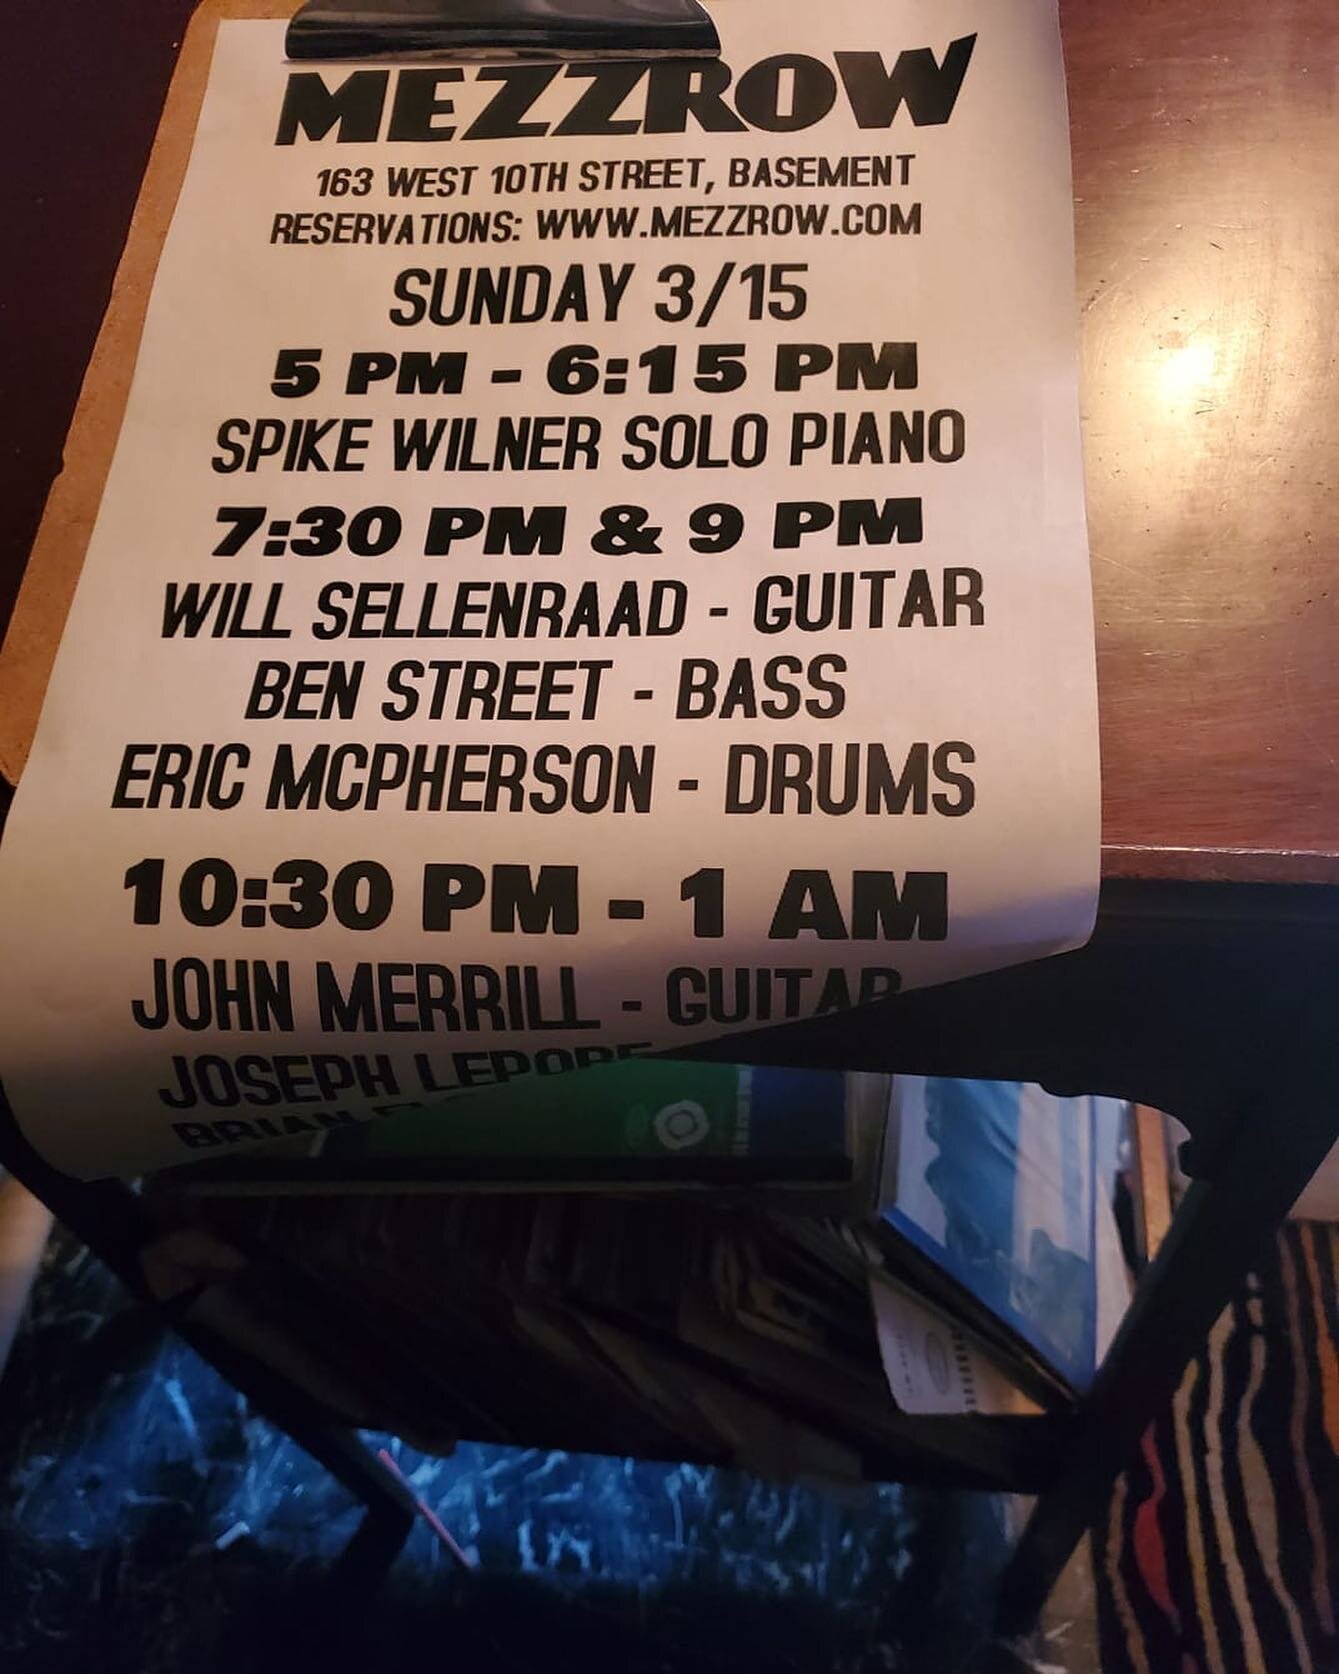 This was supposed to happen last year. 💔 Was such a heartbreaker that it didn&rsquo;t.  What a crazy year in the twilight zone.  Looking forward to the after party. 

.
.
.
.
.
.
.
#willsellenraad #benstreet #ericmcpherson #nyc #jazzclub #jazzmusici